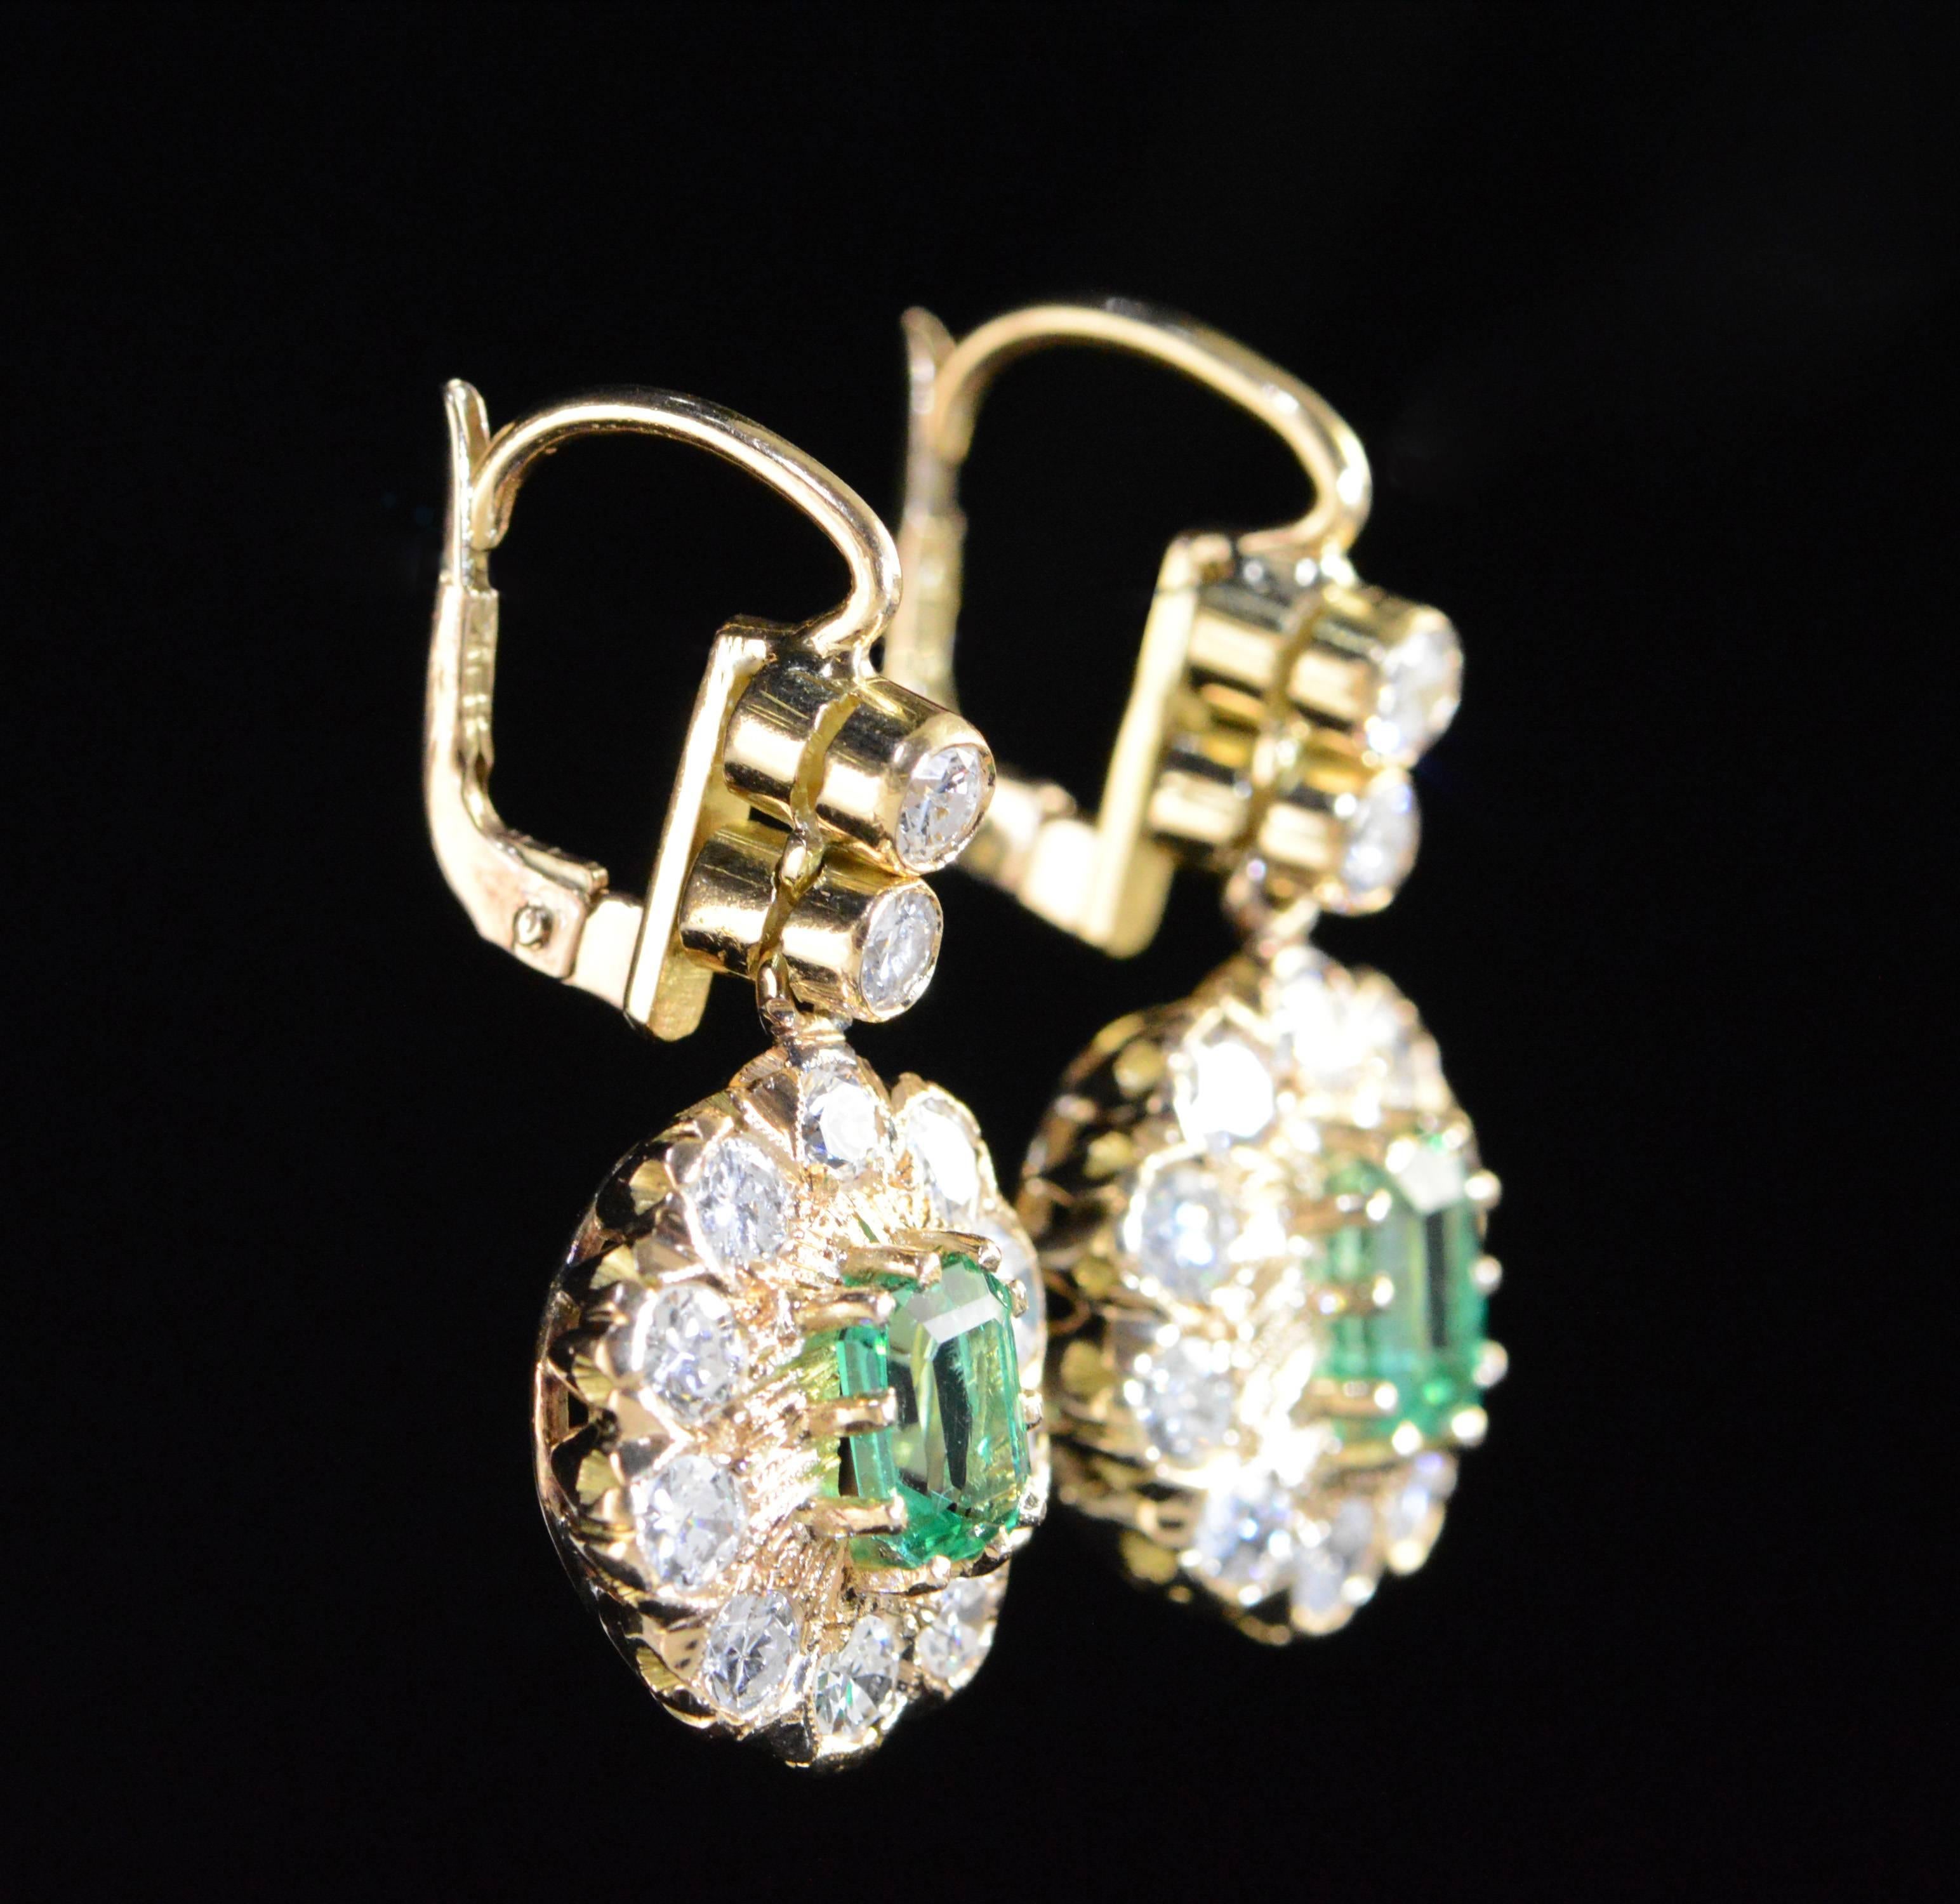  1.50 Carats Emeralds 2.80 Carats Old Mine Cut Diamonds Gold Earrings In Excellent Condition For Sale In Frederick, MD